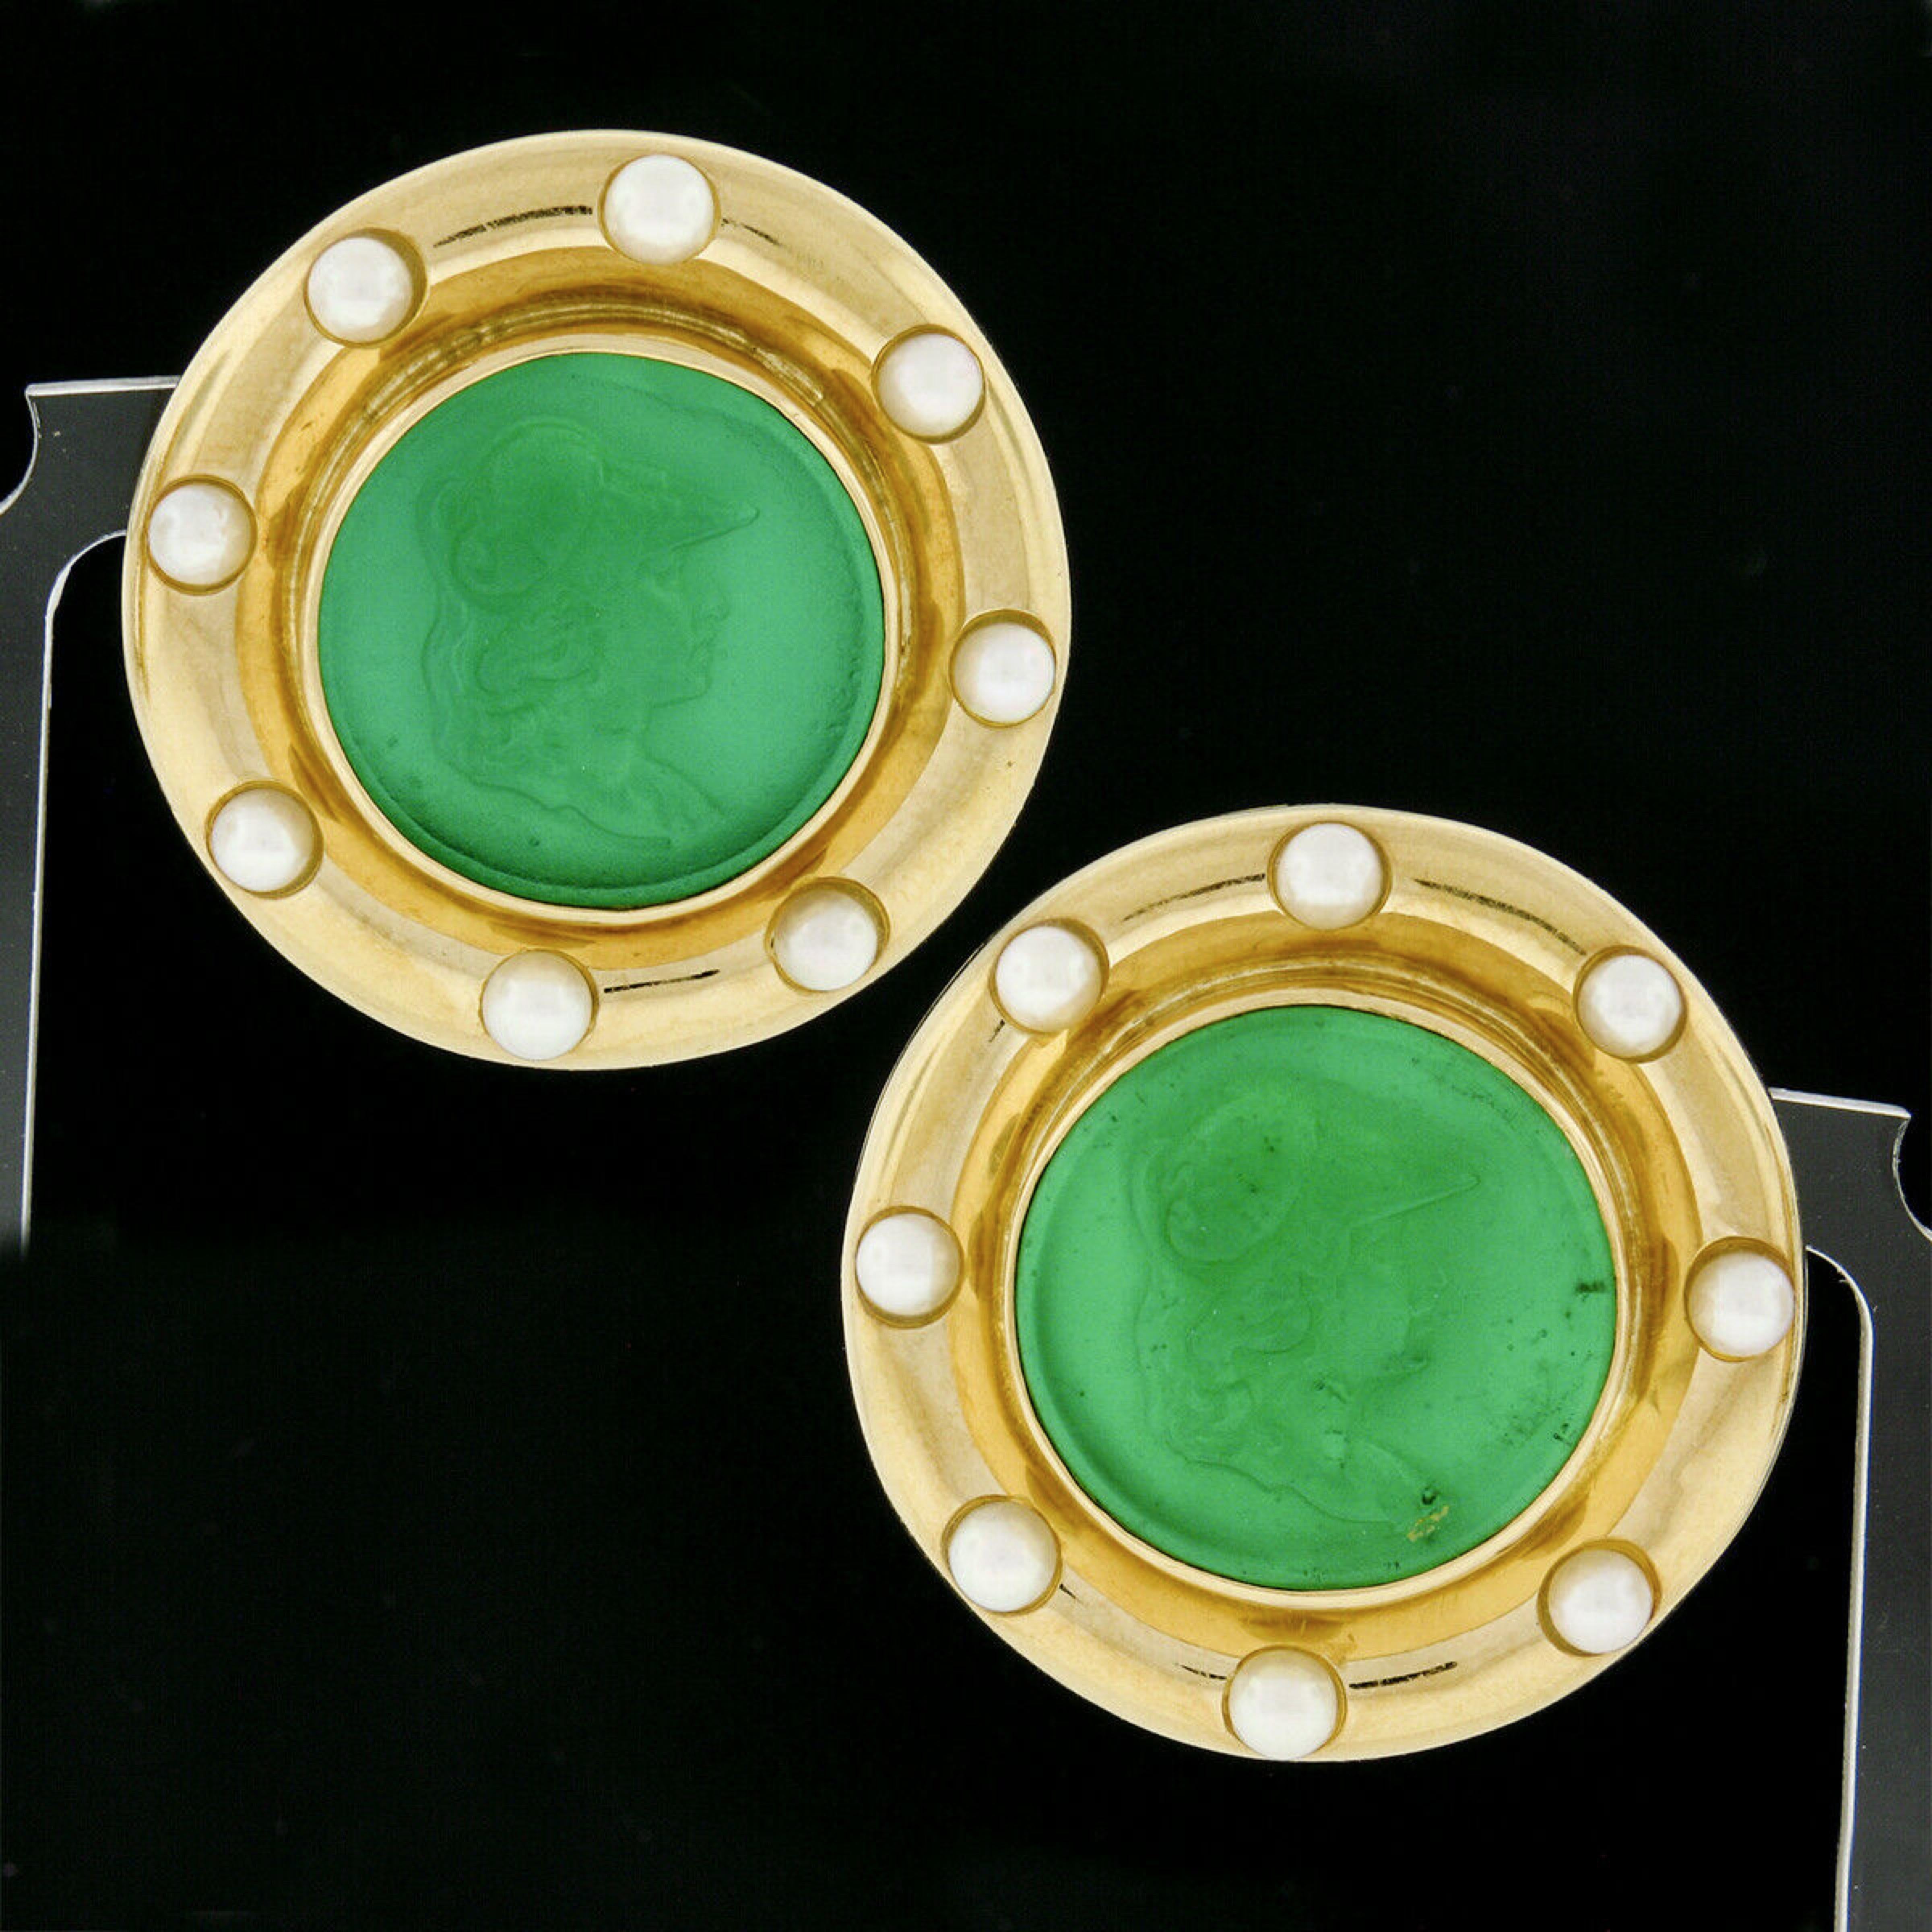 This unusual and truly stunning pair of vintage earrings by Elizabeth Locke are crafted in solid 18k yellow gold and each features a green glass intaglio that is bezel set above a white mother of pearl disk in the background. The detailed intaglio